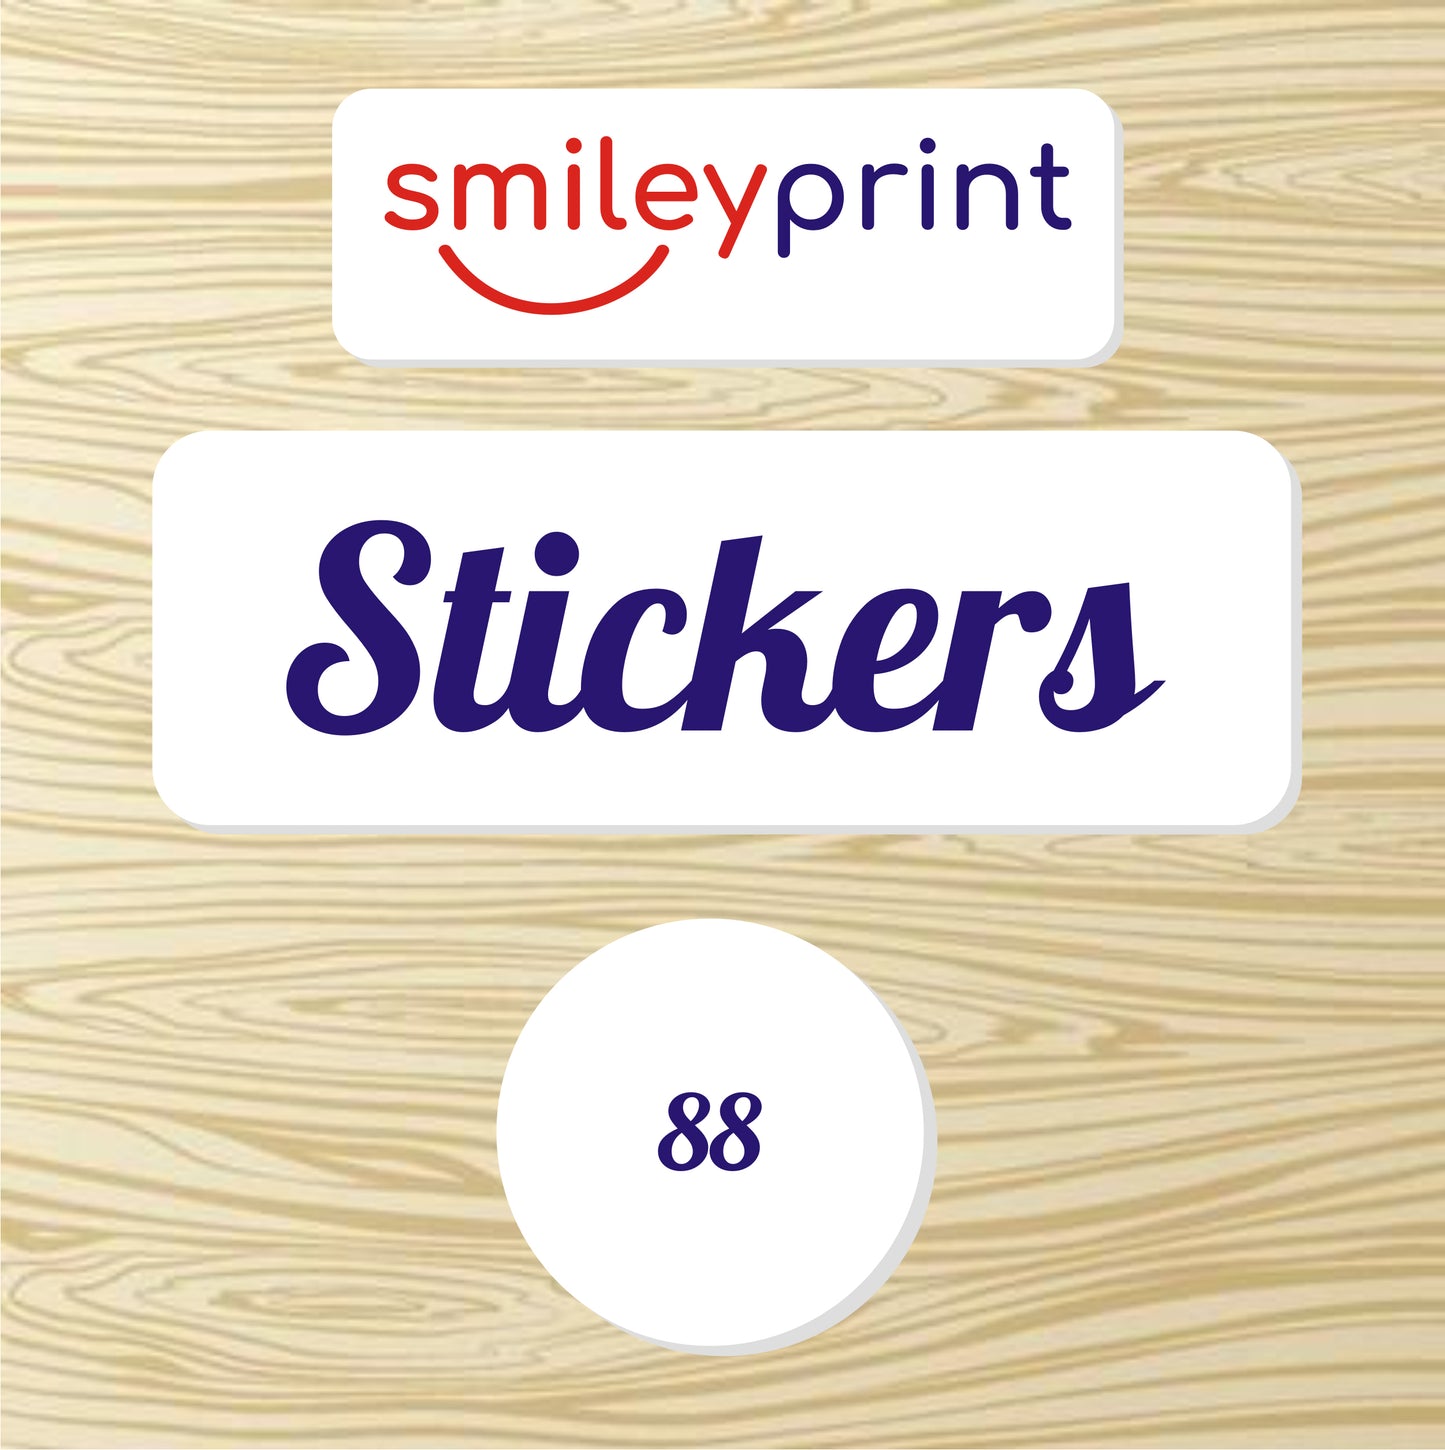 Stickers | Smileyprint.co.uk